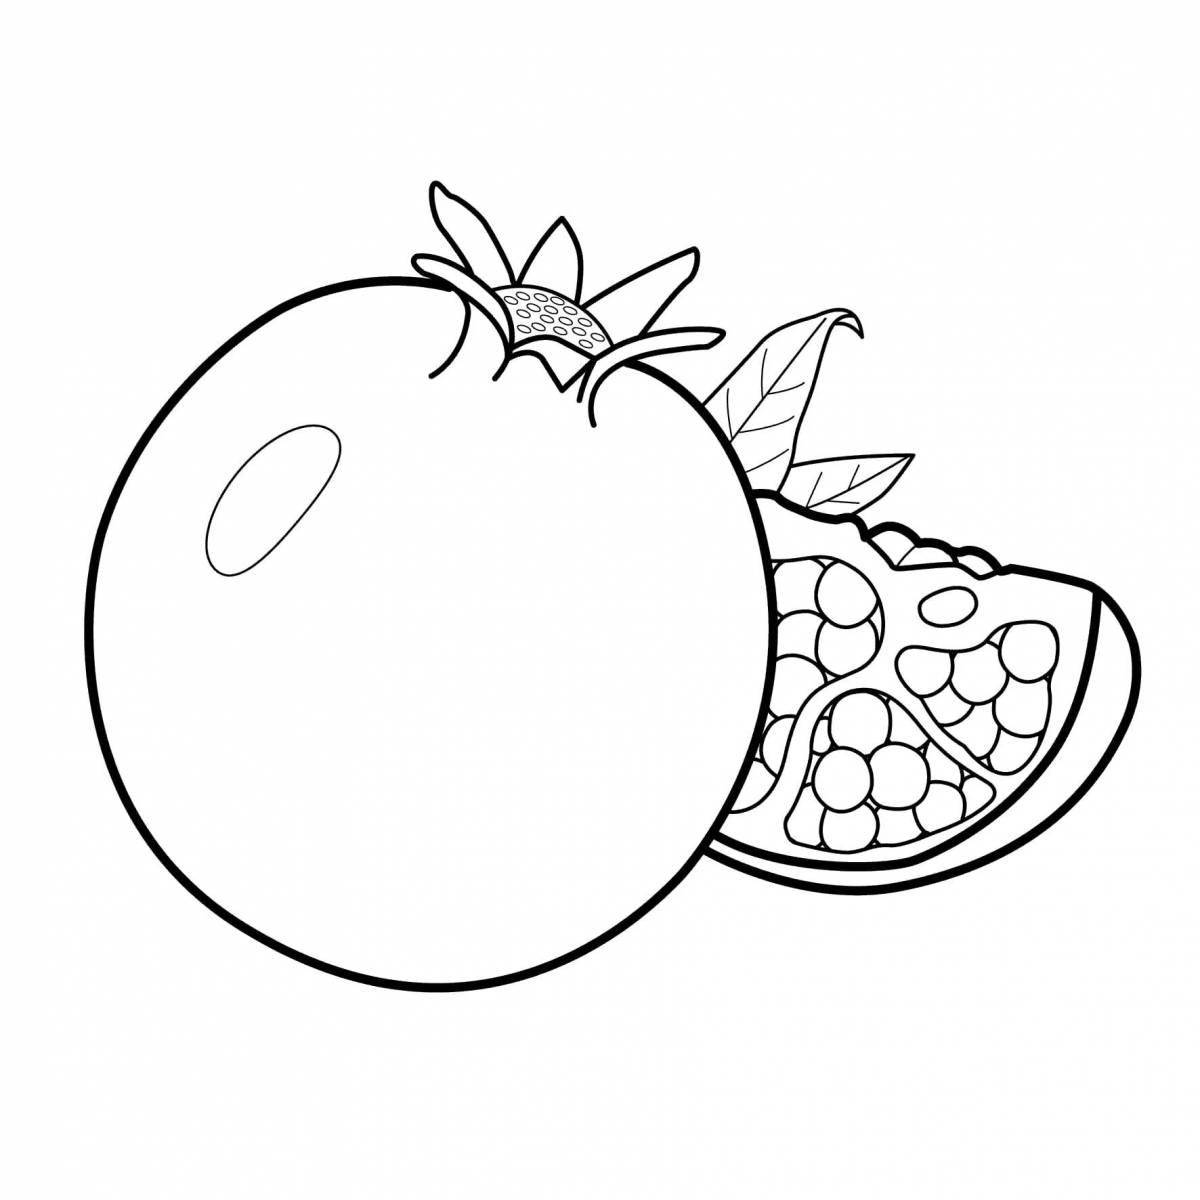 Adorable fruits and vegetables coloring book